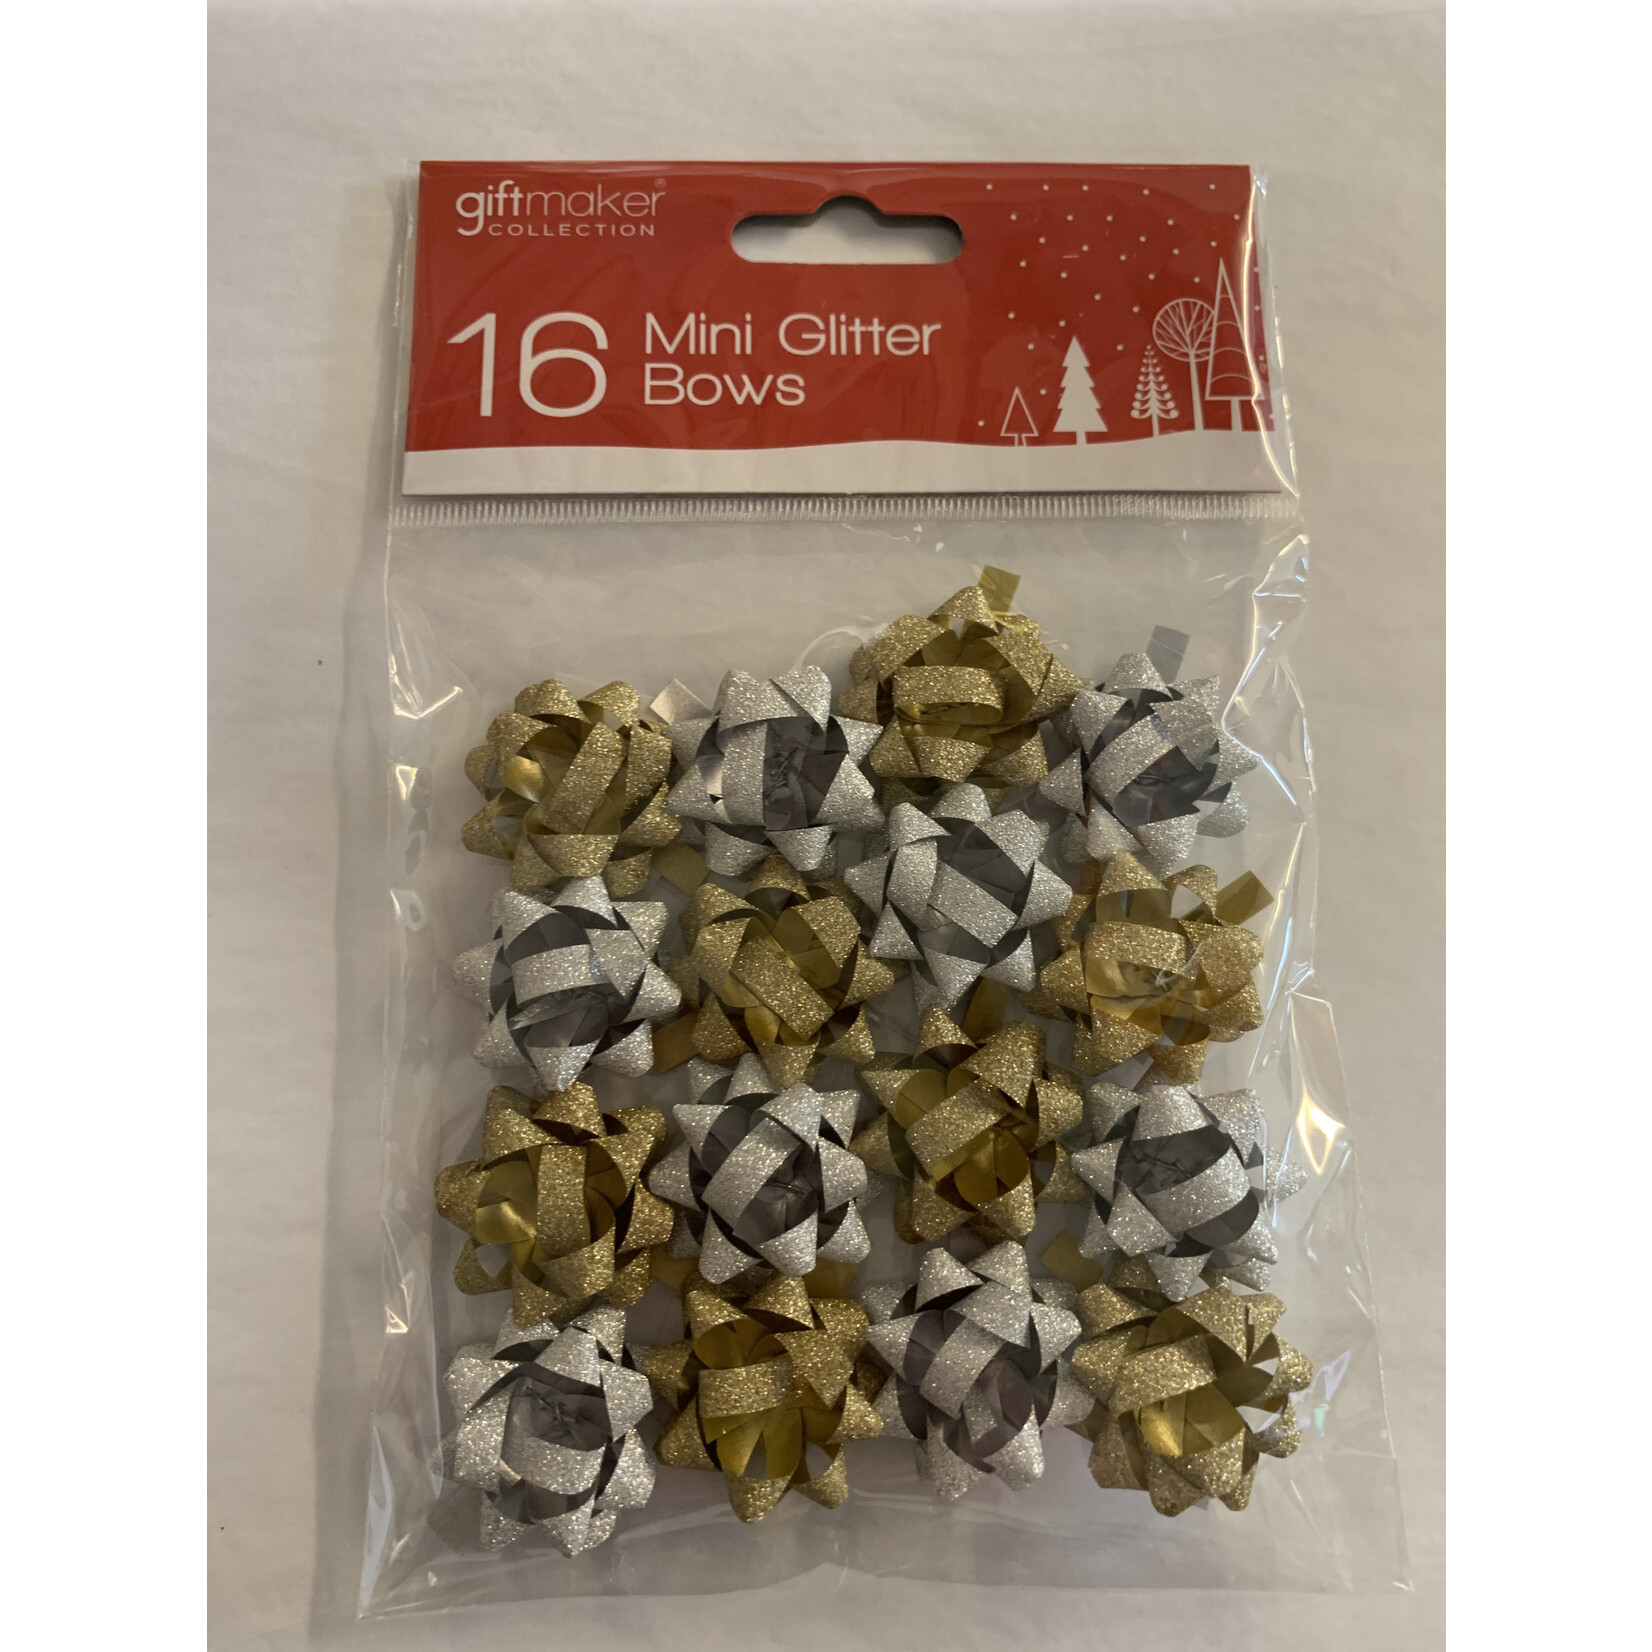 Gift maker collection Silver & Gold Mini Glitter Bows